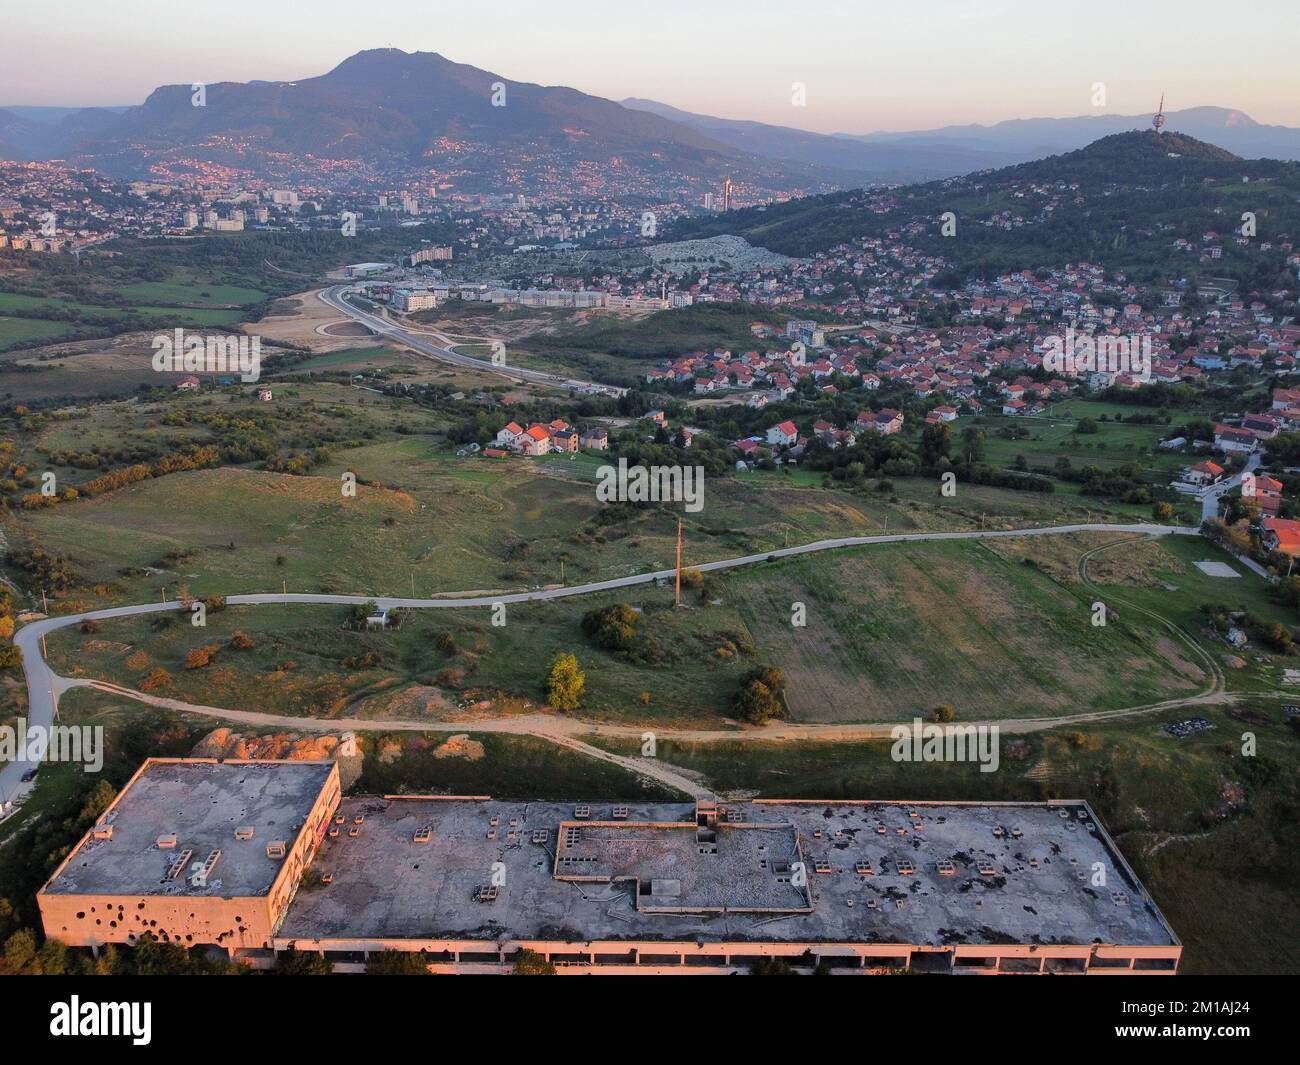 An aerial shot of Sarajevo city surrounded by hills and mountains during the daytime Stock Photo